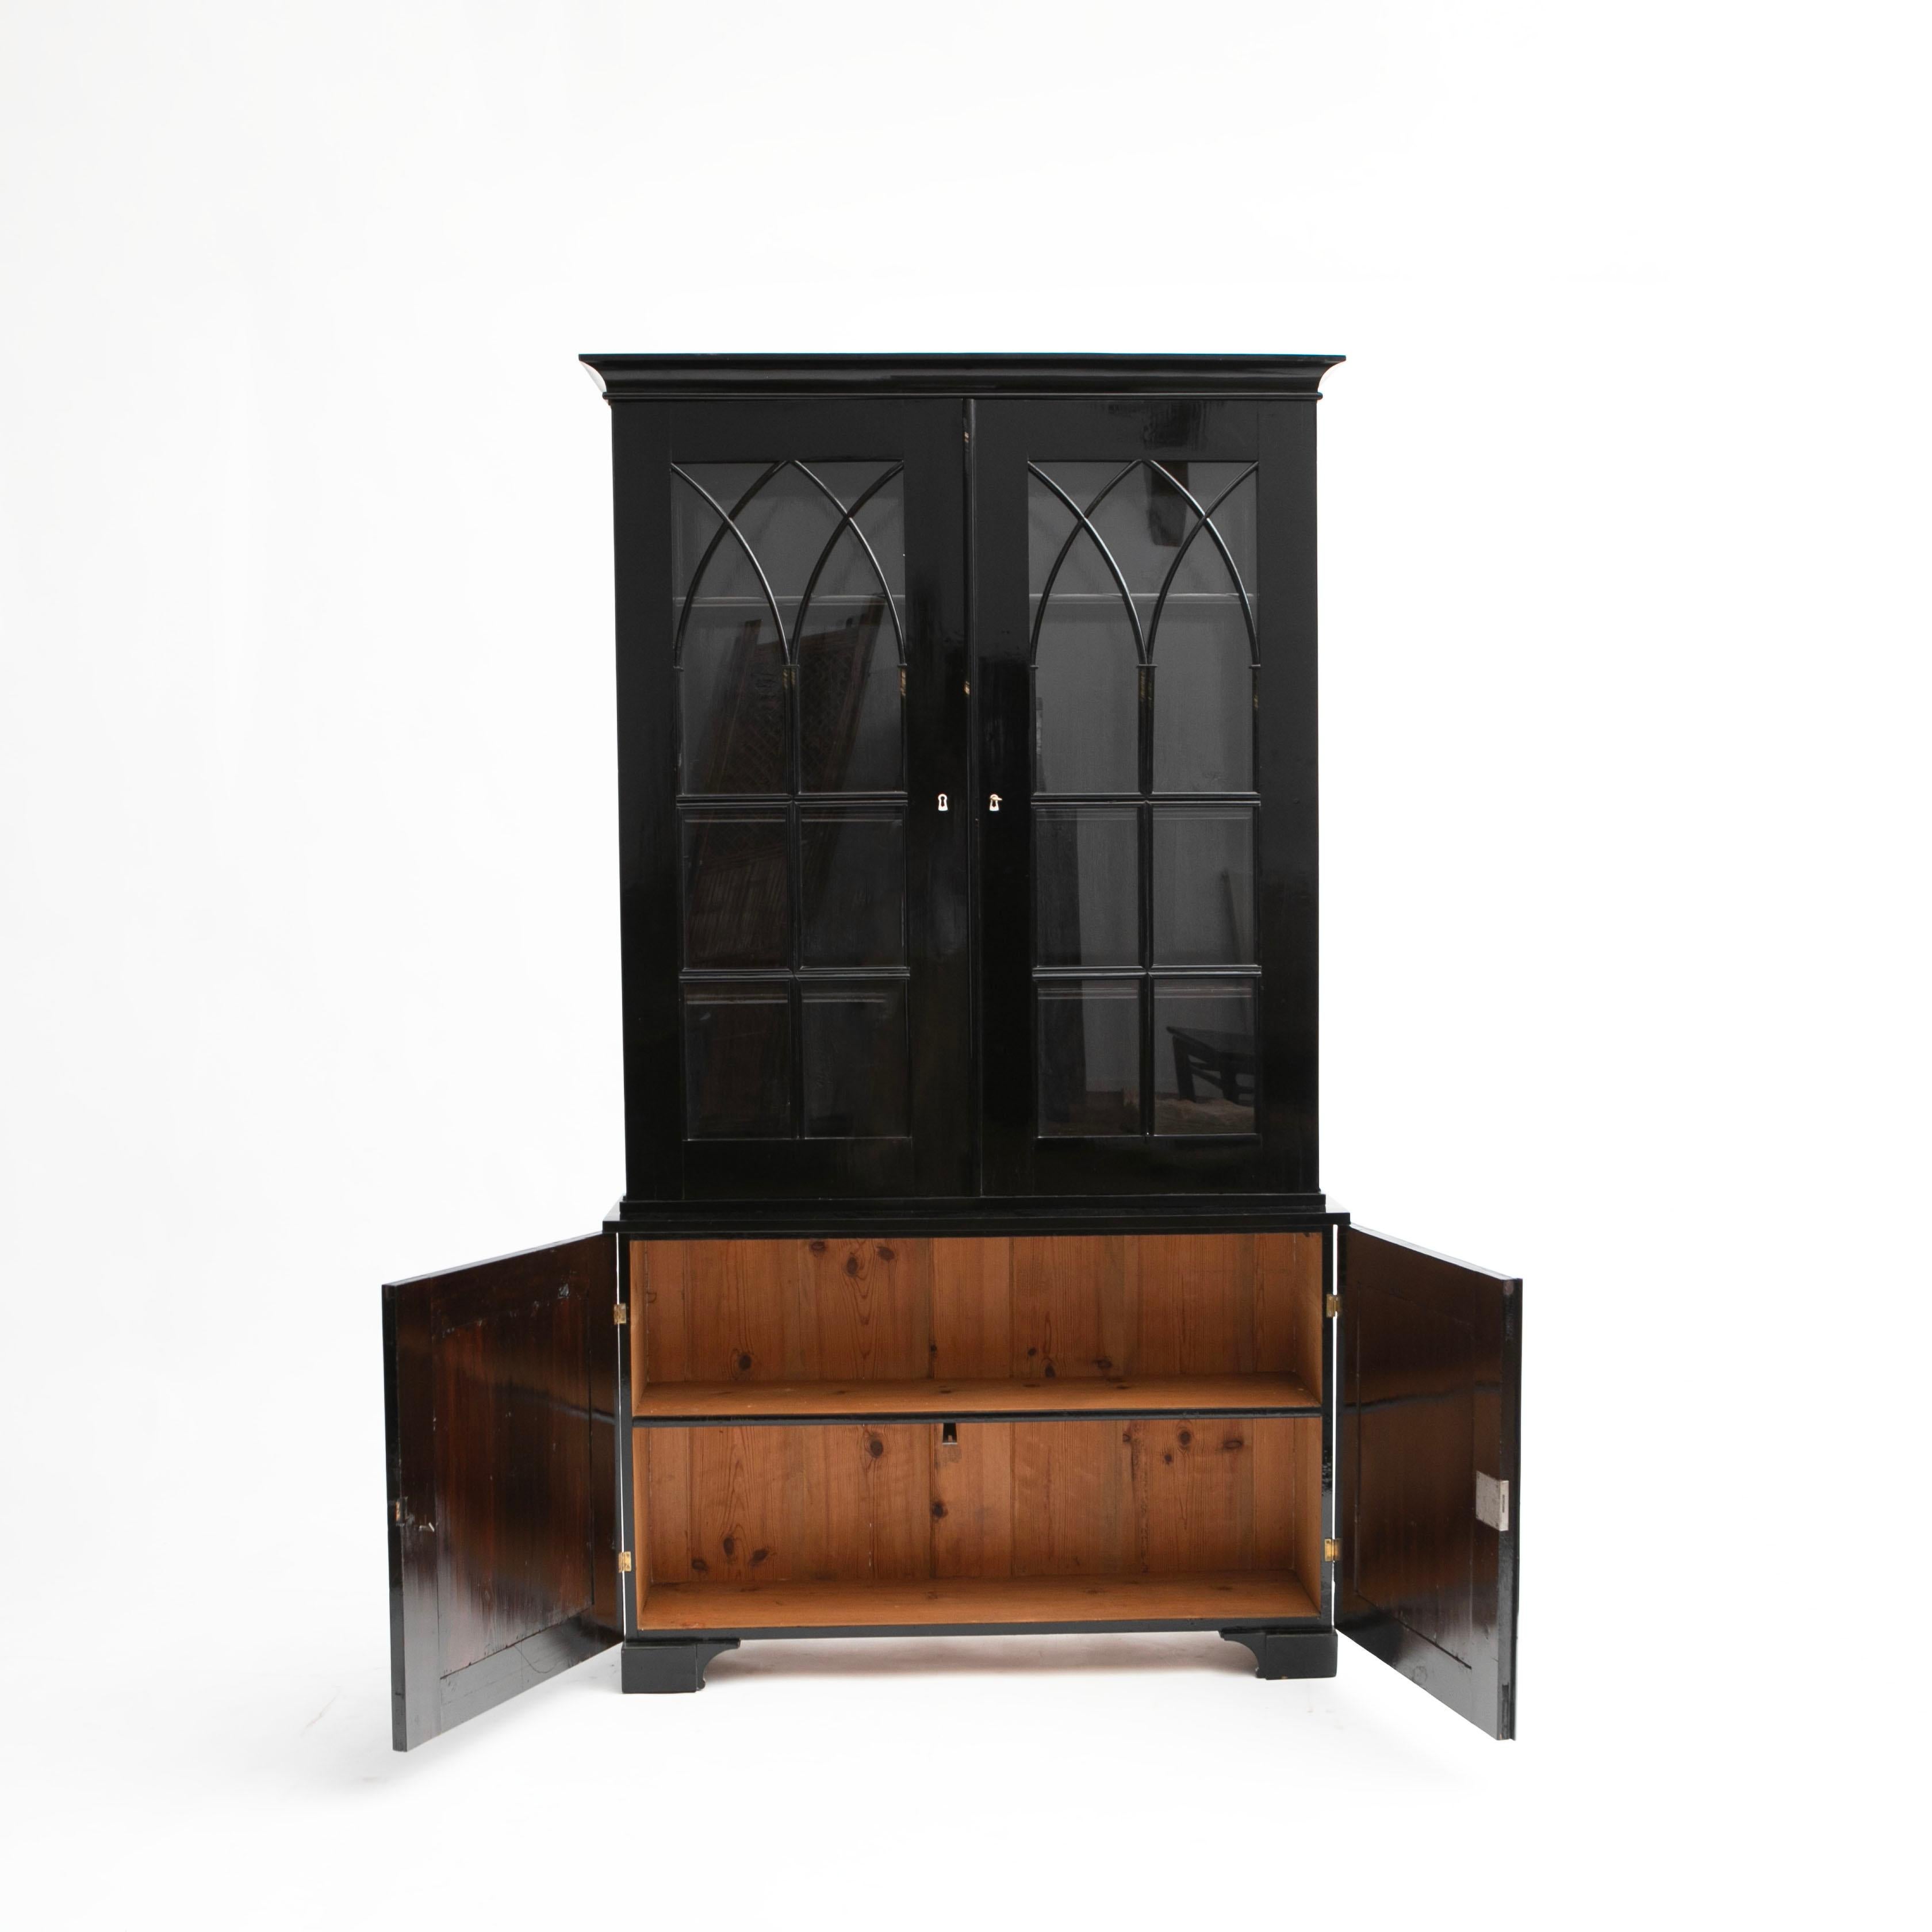 Polished Swedish Late Empire Black-polished Birch Bookcase For Sale